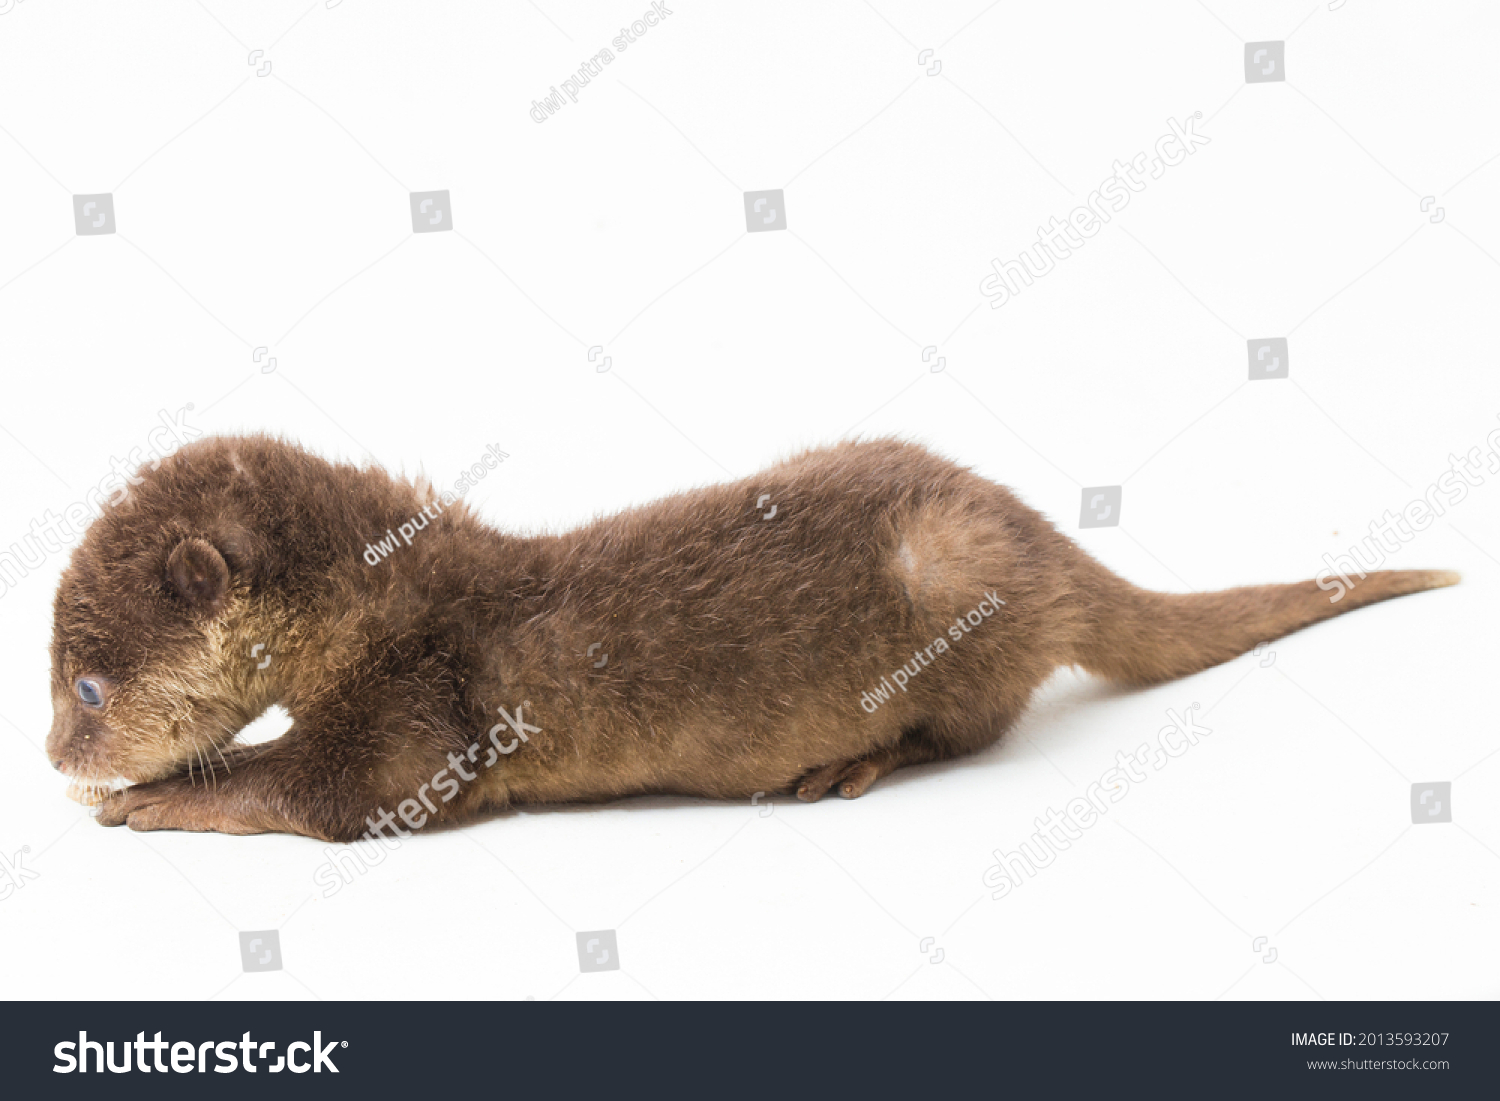 Asian small-clawed otter, also known as the oriental small-clawed otter or simply small-clawed otter isolated white background
 #2013593207